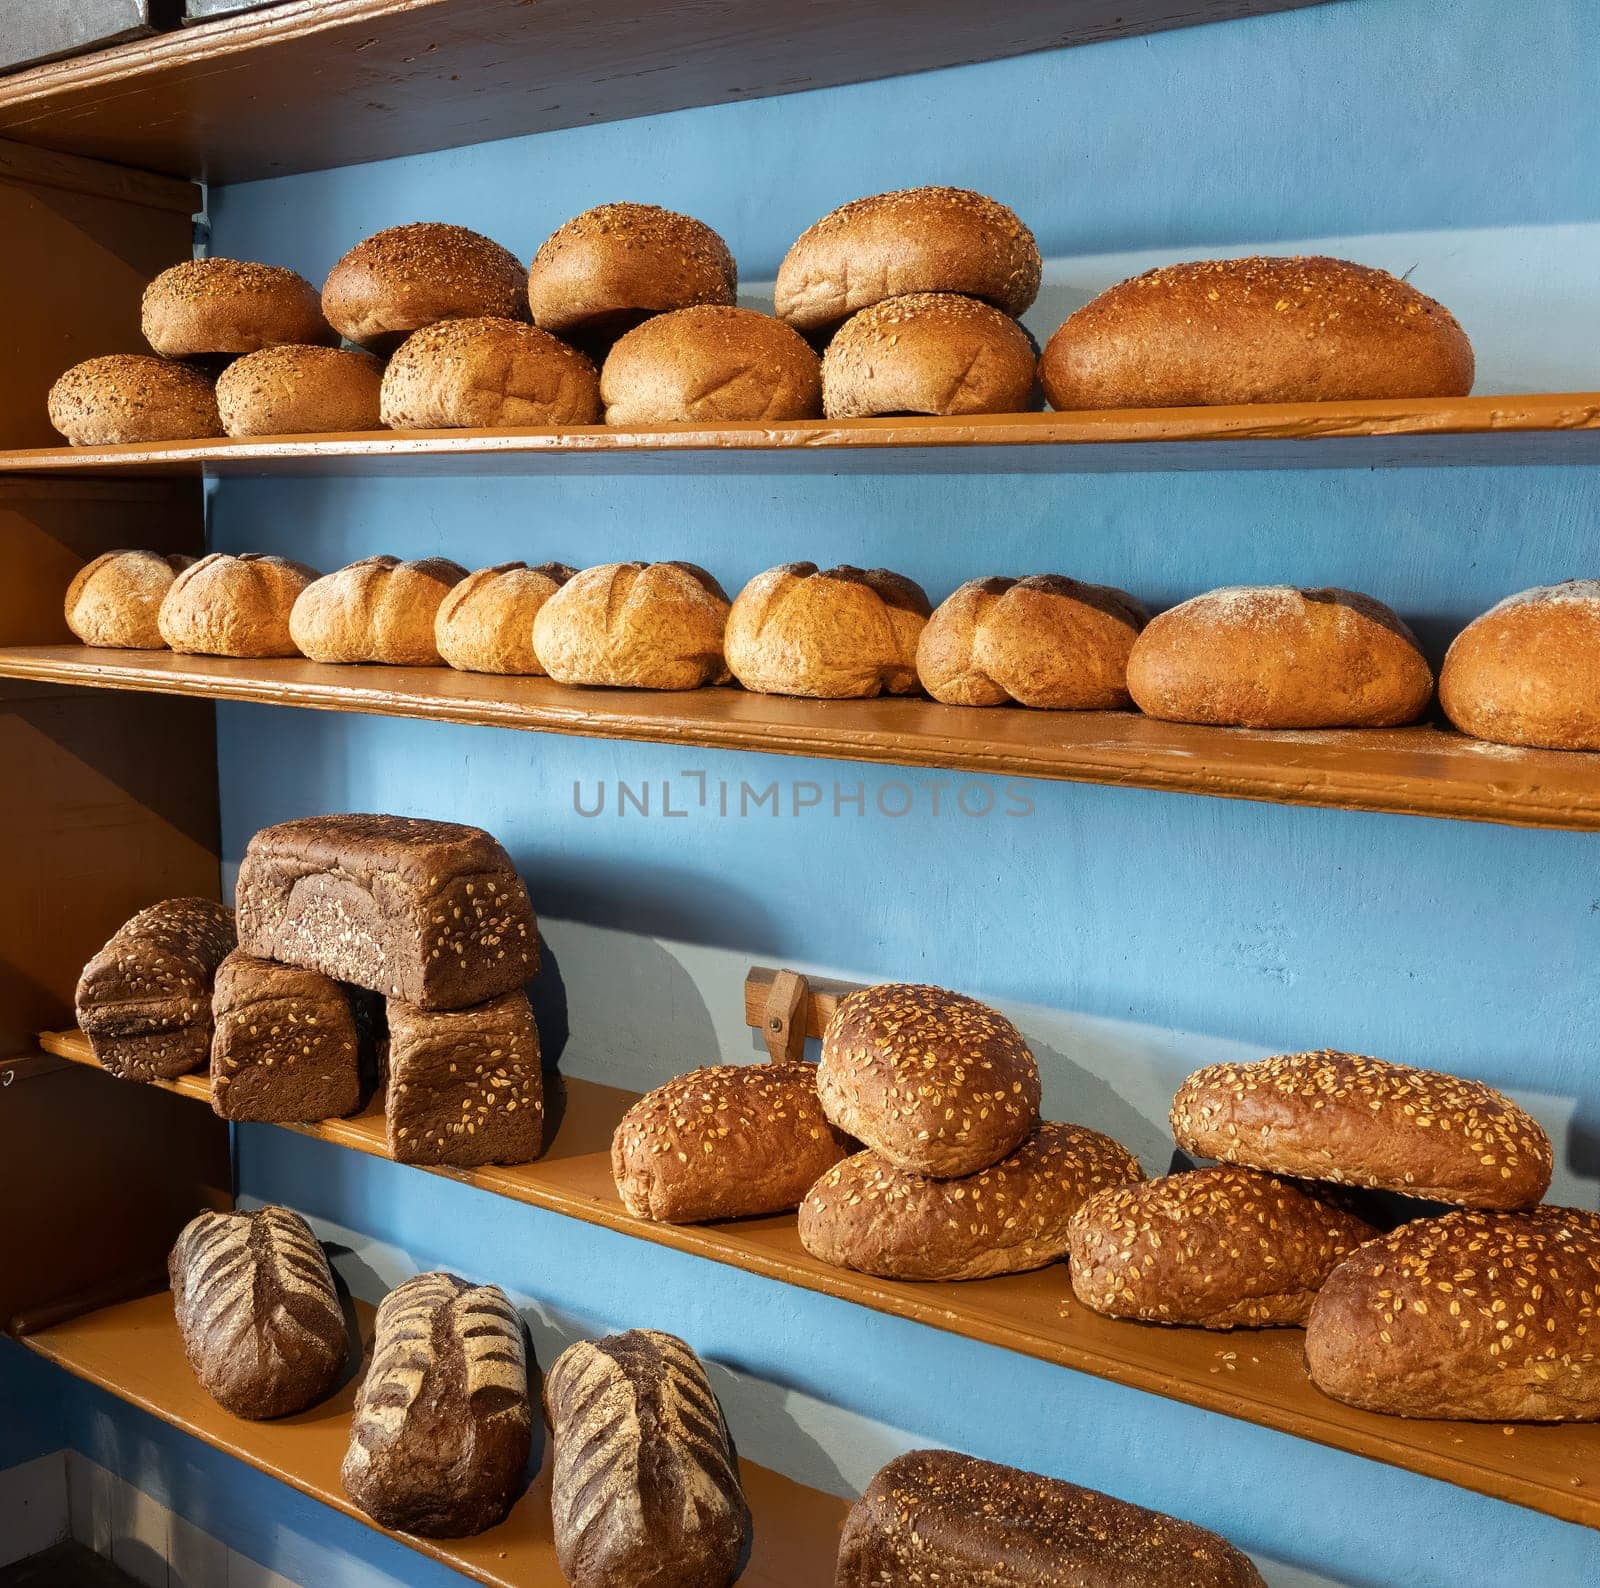 types of bread on the shelves in the bakery such as white bread, brown bread and wholemeal bread